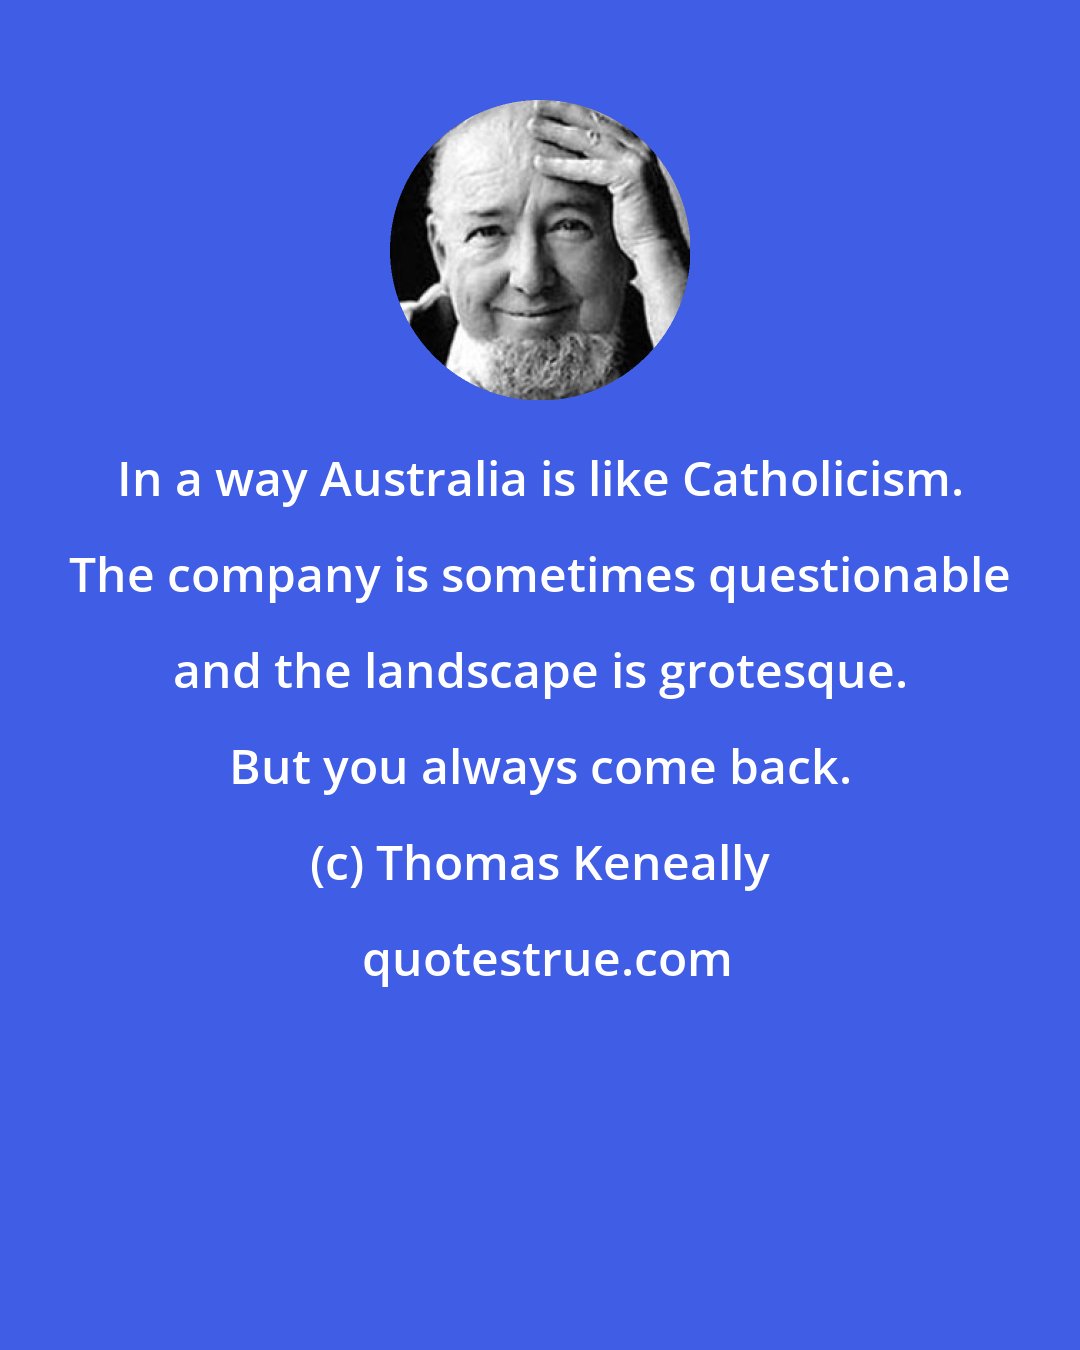 Thomas Keneally: In a way Australia is like Catholicism. The company is sometimes questionable and the landscape is grotesque. But you always come back.